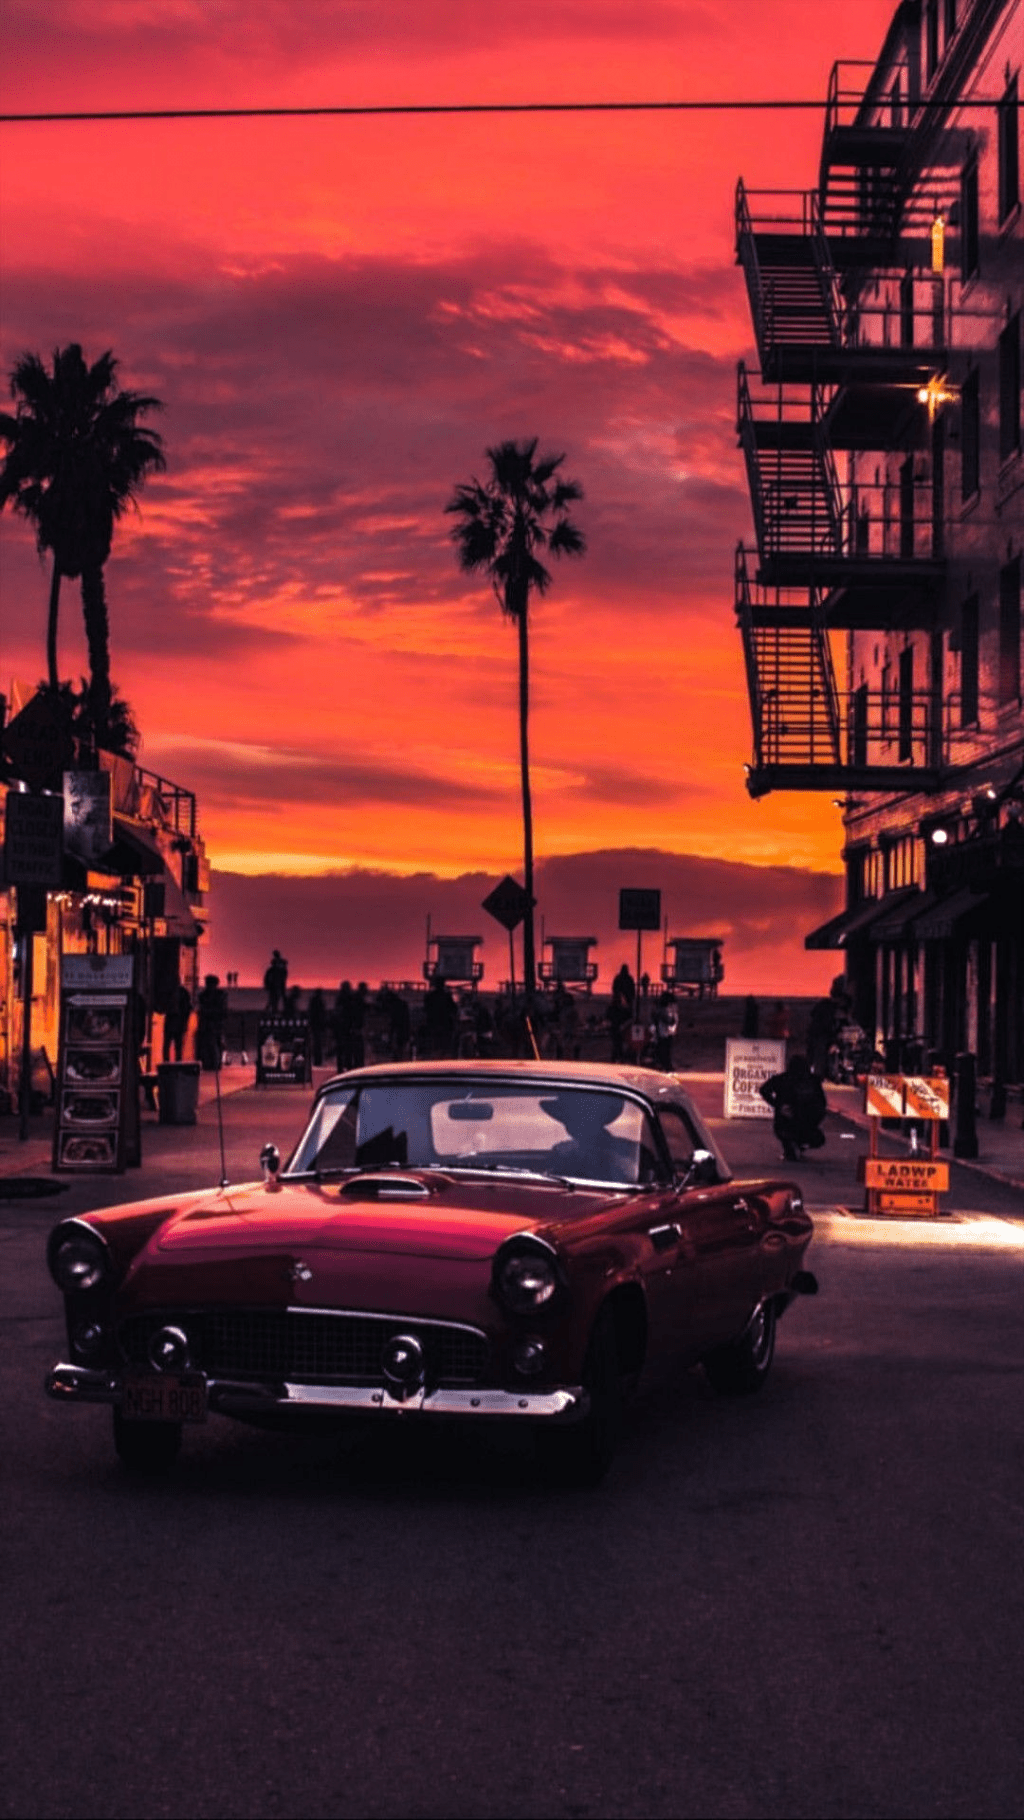 A red car parked on the street at sunset - Cars